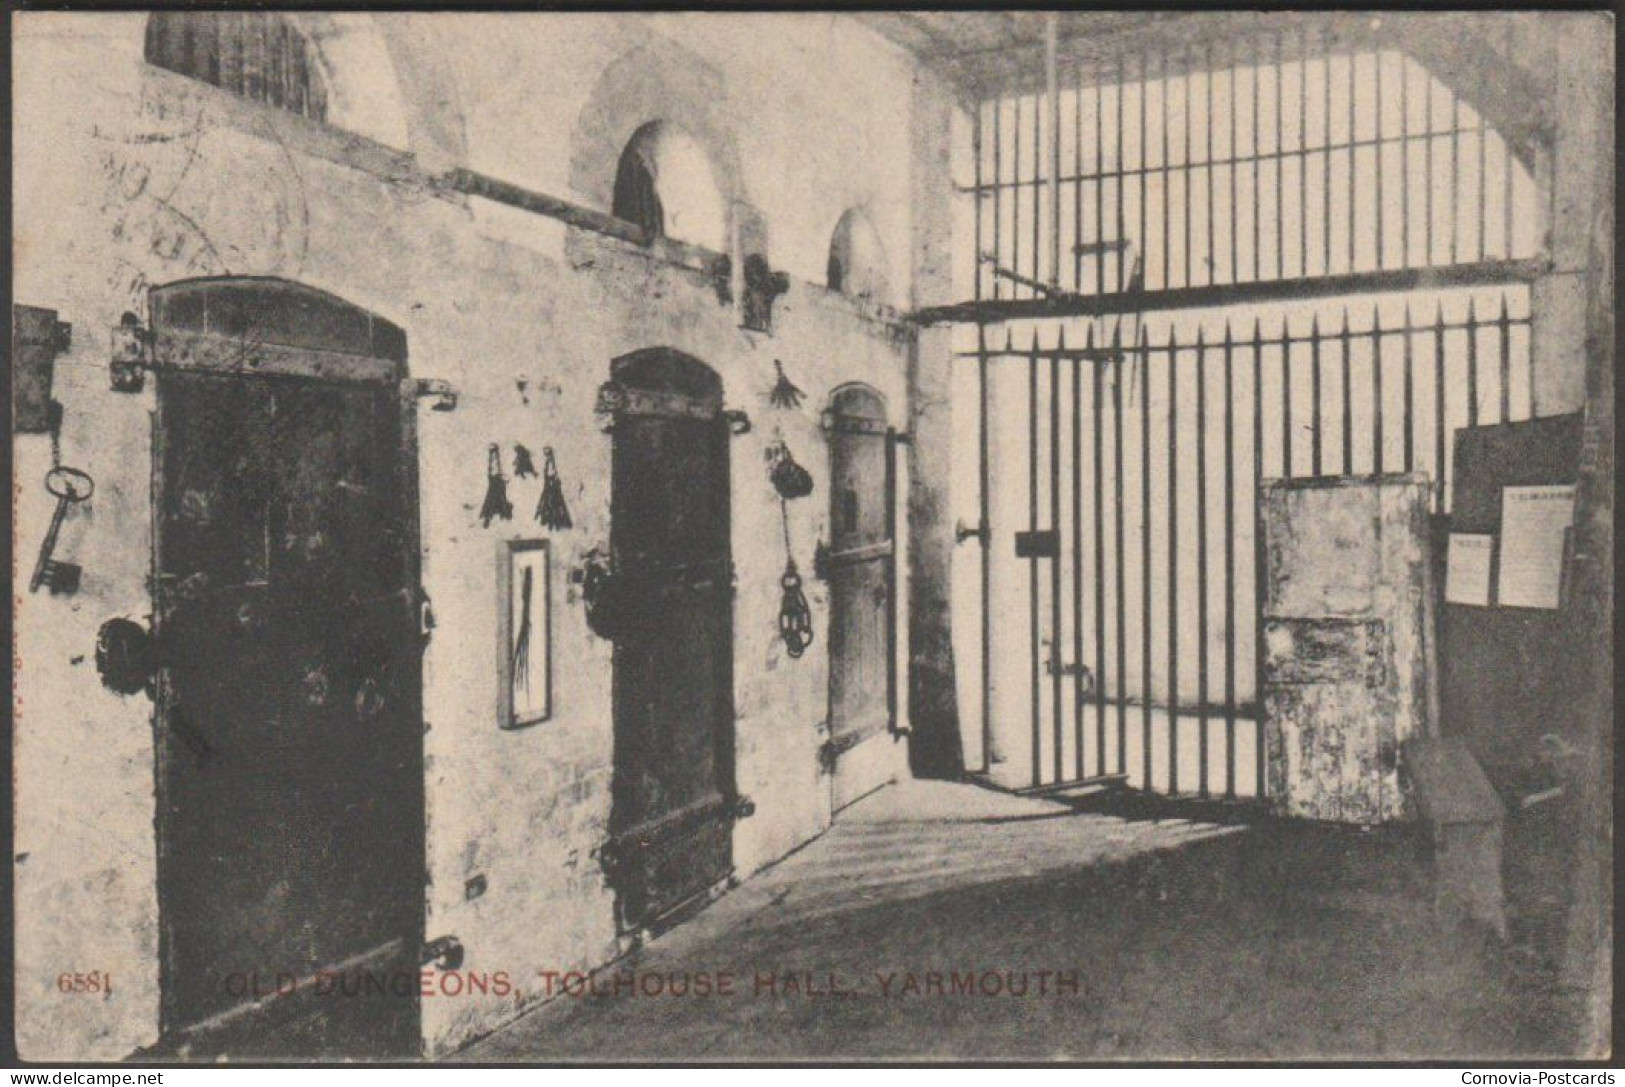 Old Dungeons, Tolhouse Hall, Yarmouth, Norfolk, 1911 - Postcard - Great Yarmouth